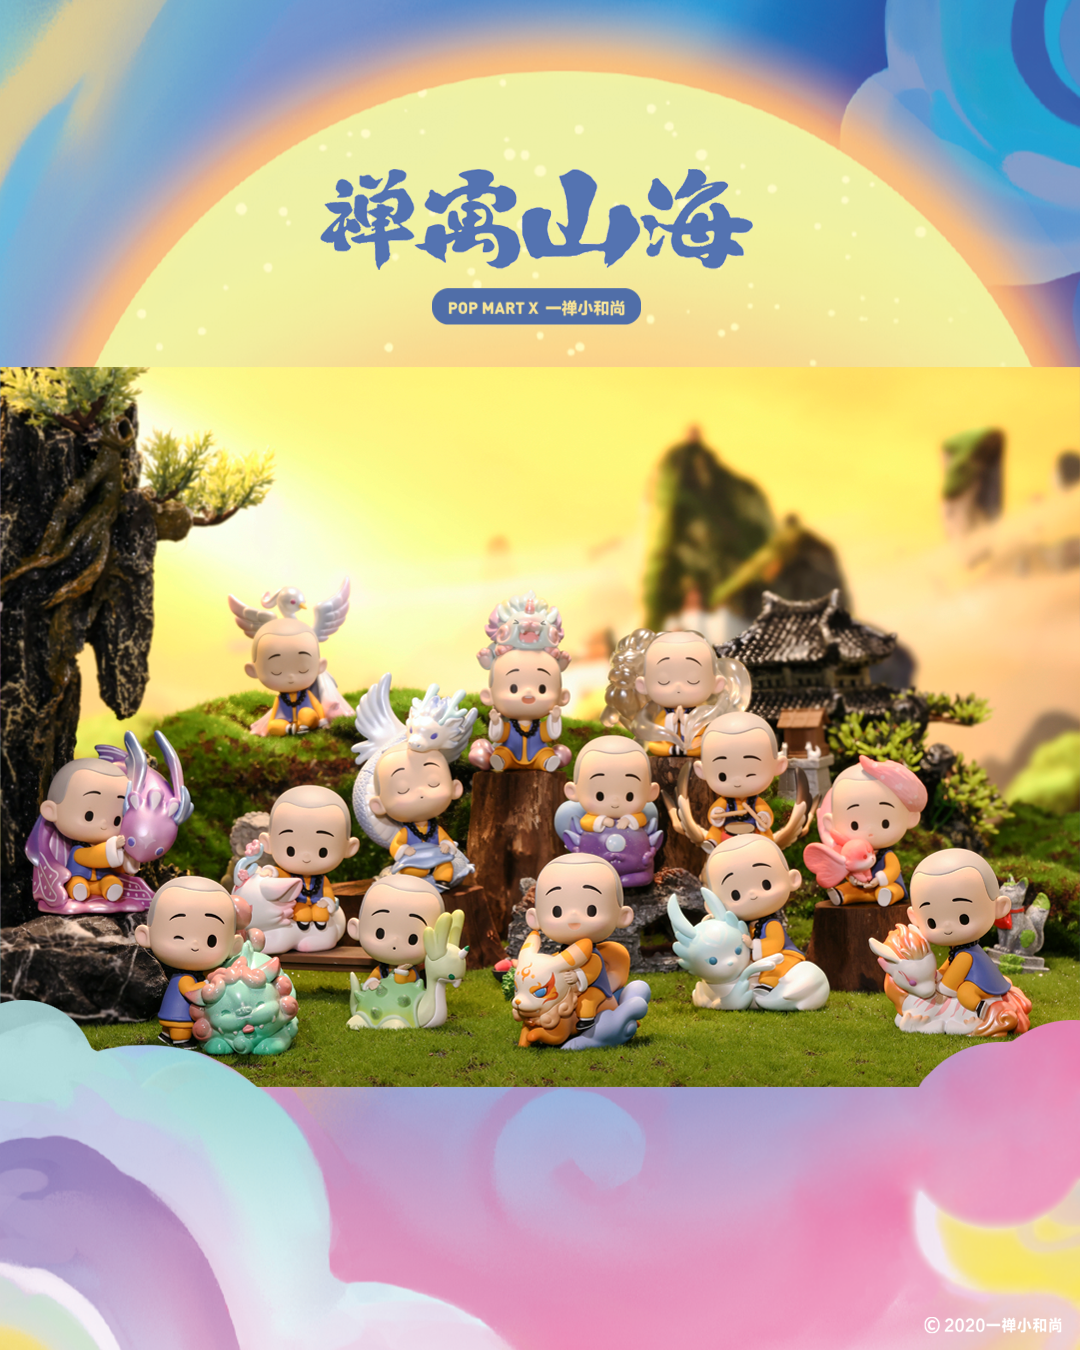 Cartoon figurines from Classic of Mountains and Seas by YI CHAN, including a baby on a horse and a child with wings.